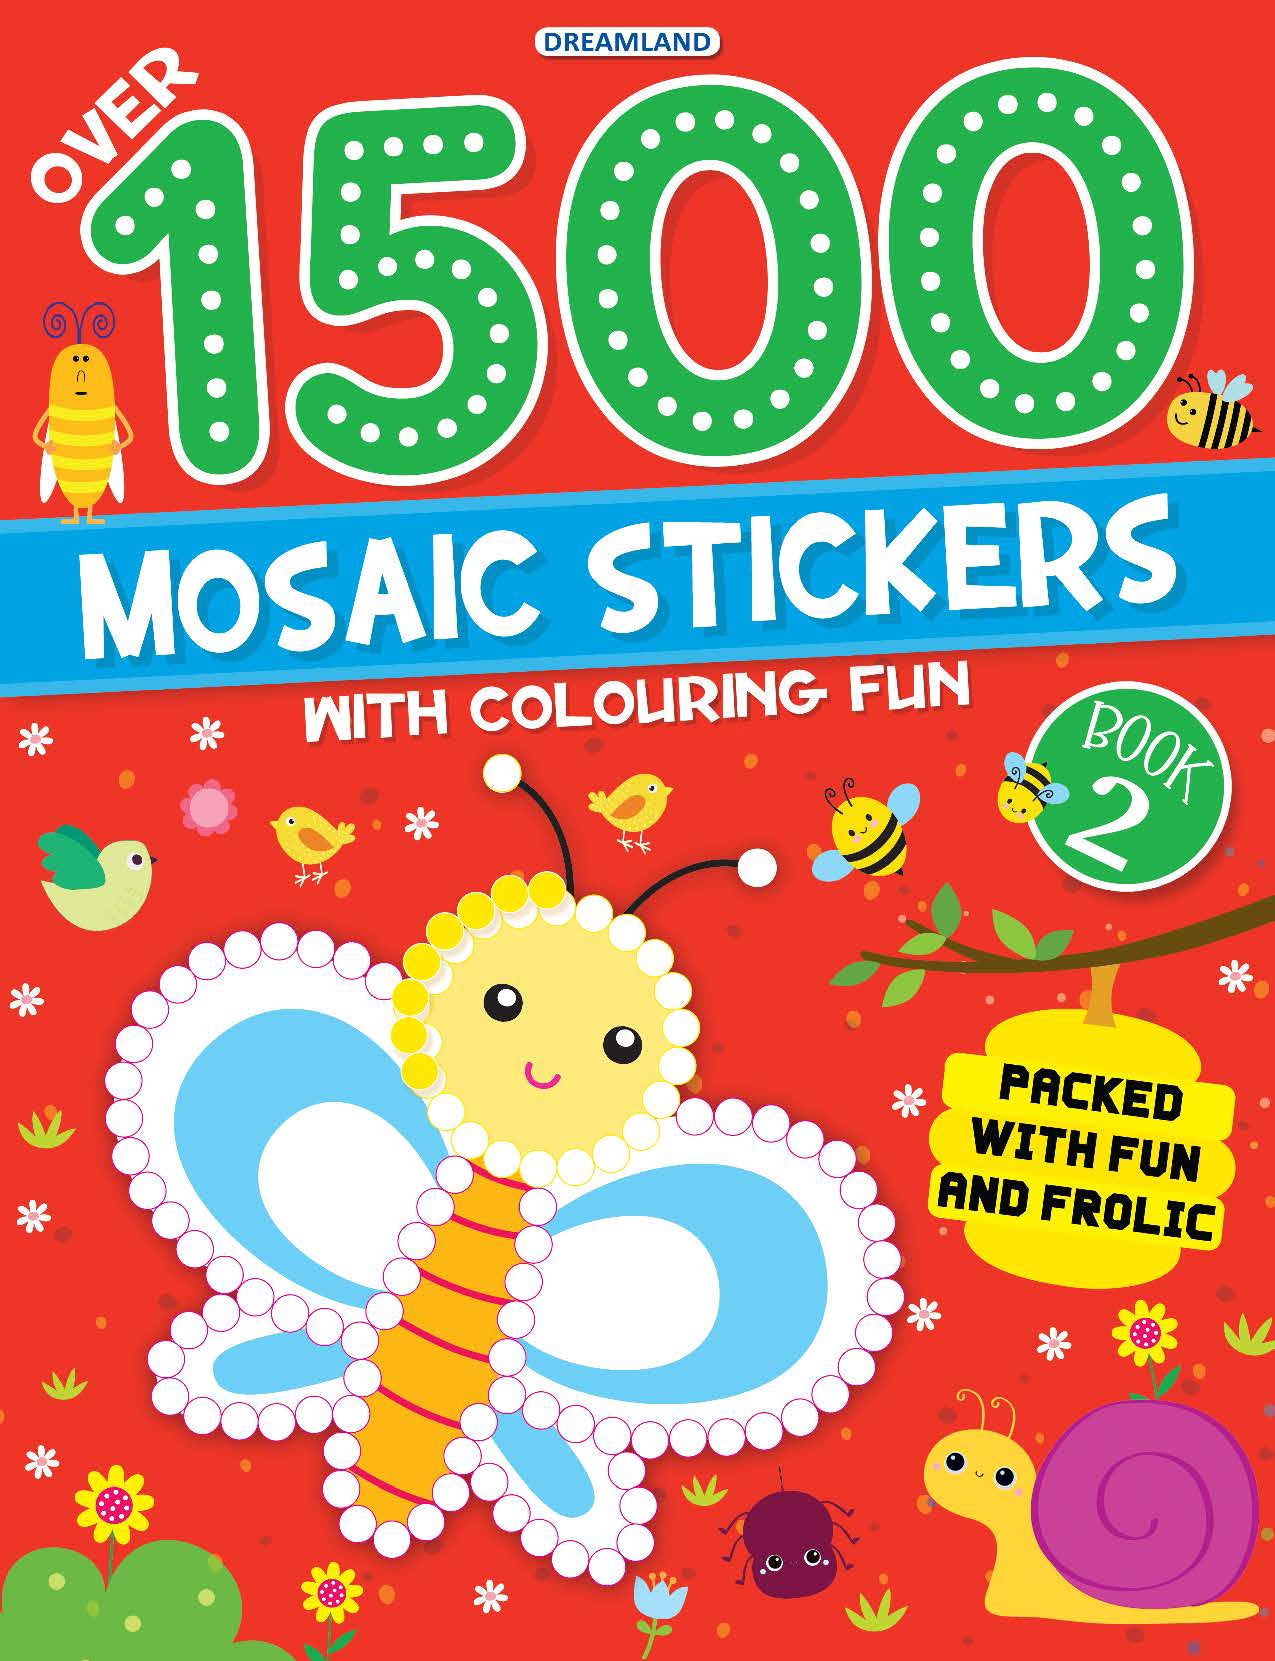 Dreamland Publications 1500 Mosaic Stickers Book 2 with Colouring Fun - Sticker Book for Kids Age 4 - 8 years - Distacart